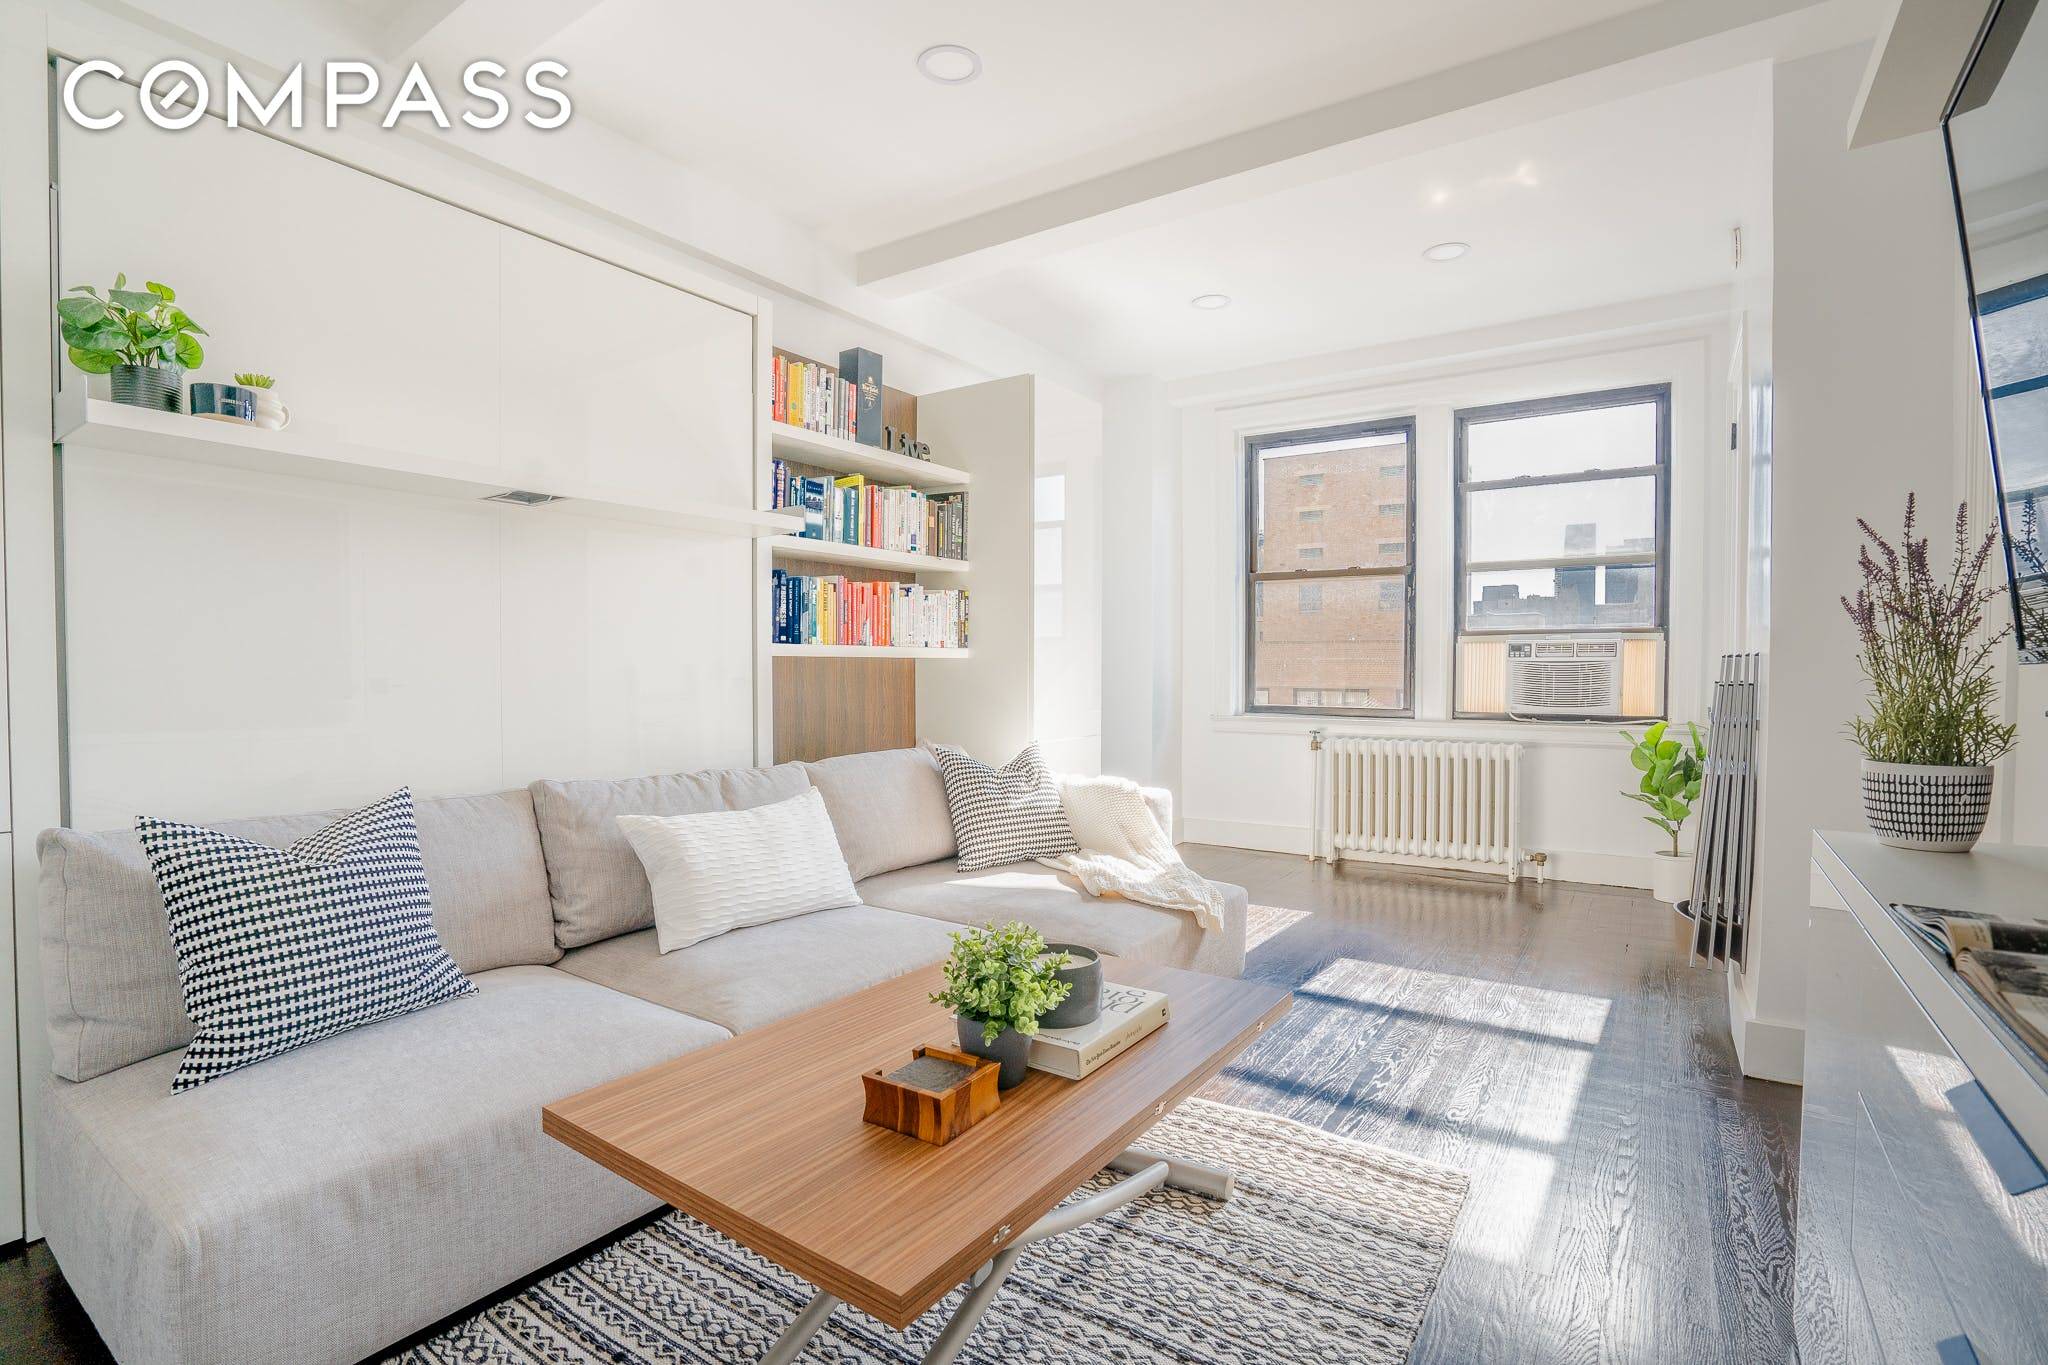 With Central Park and Columbus Circle just a few blocks away, live at the center of it all in this beautiful, gut renovated studio with open southern views of Hudson ...